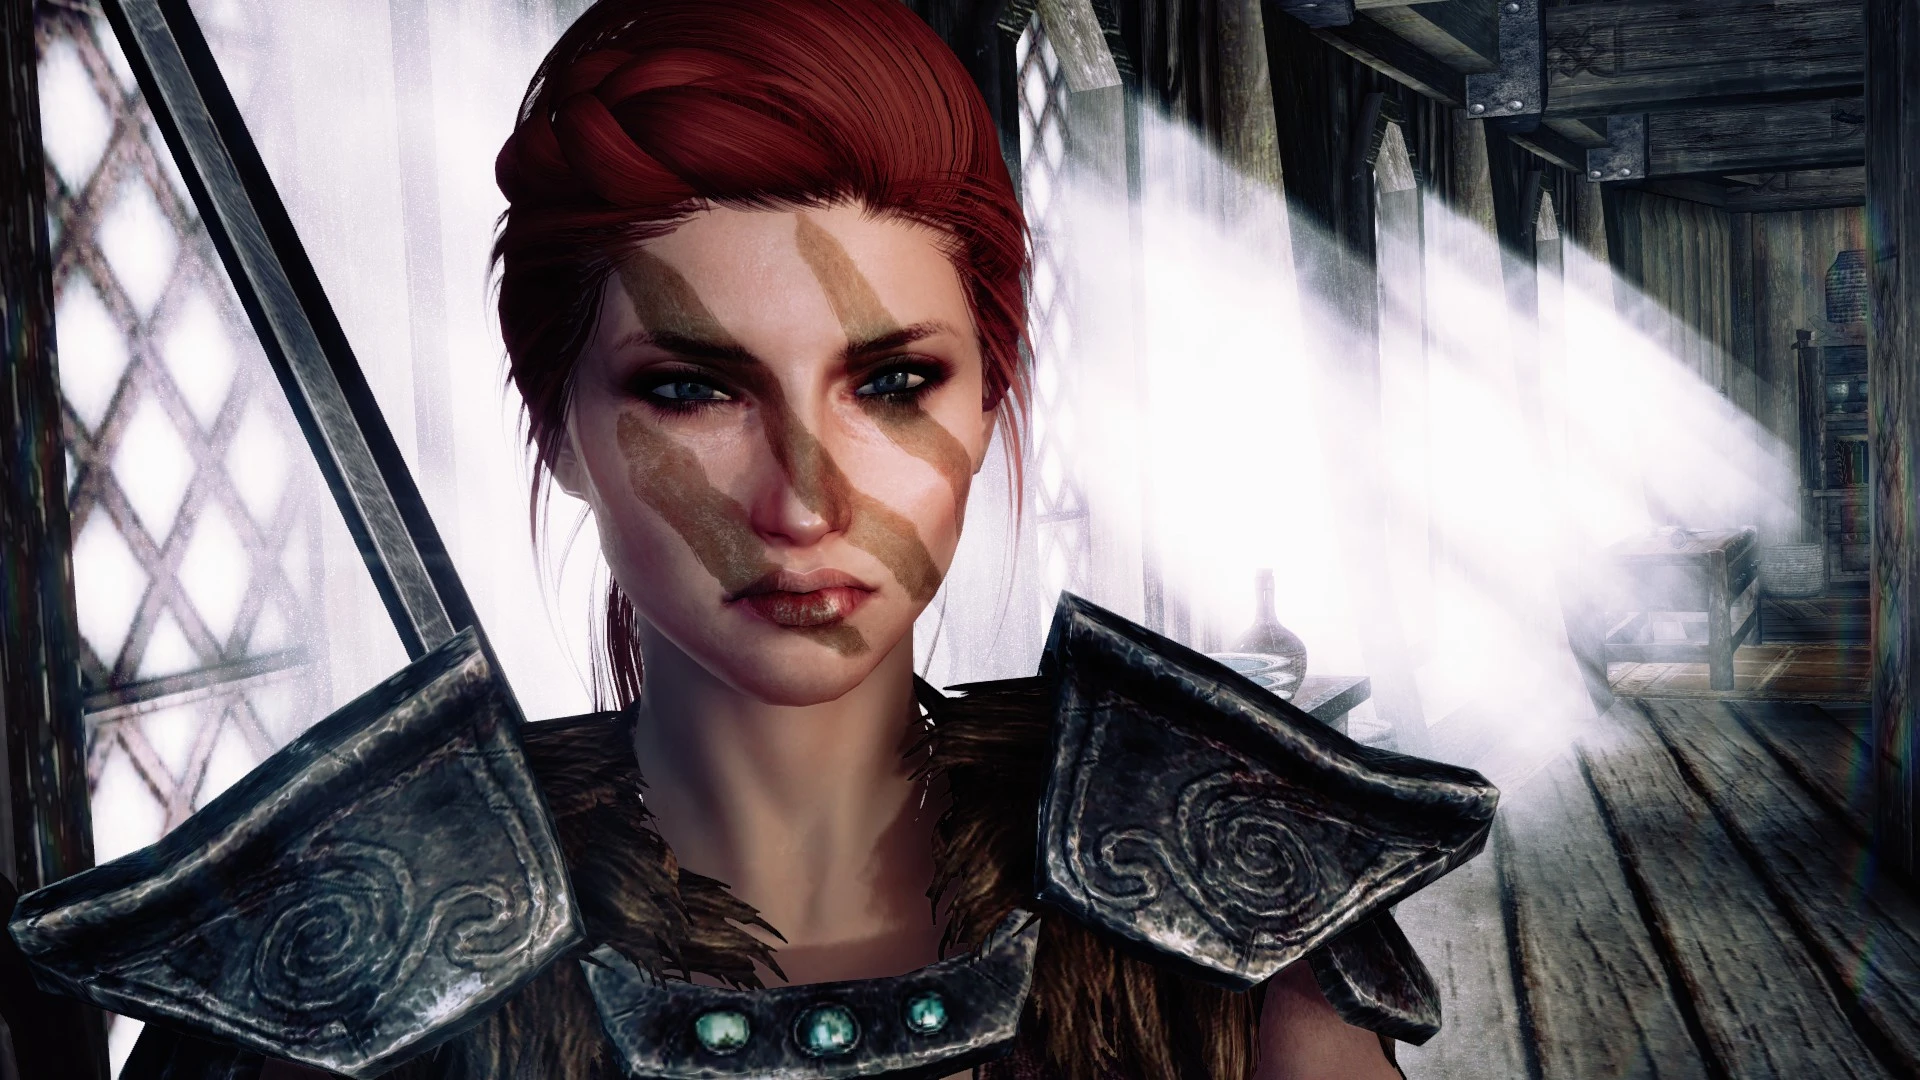 My version of Aela the Huntress just released on Nexus Mods (SE